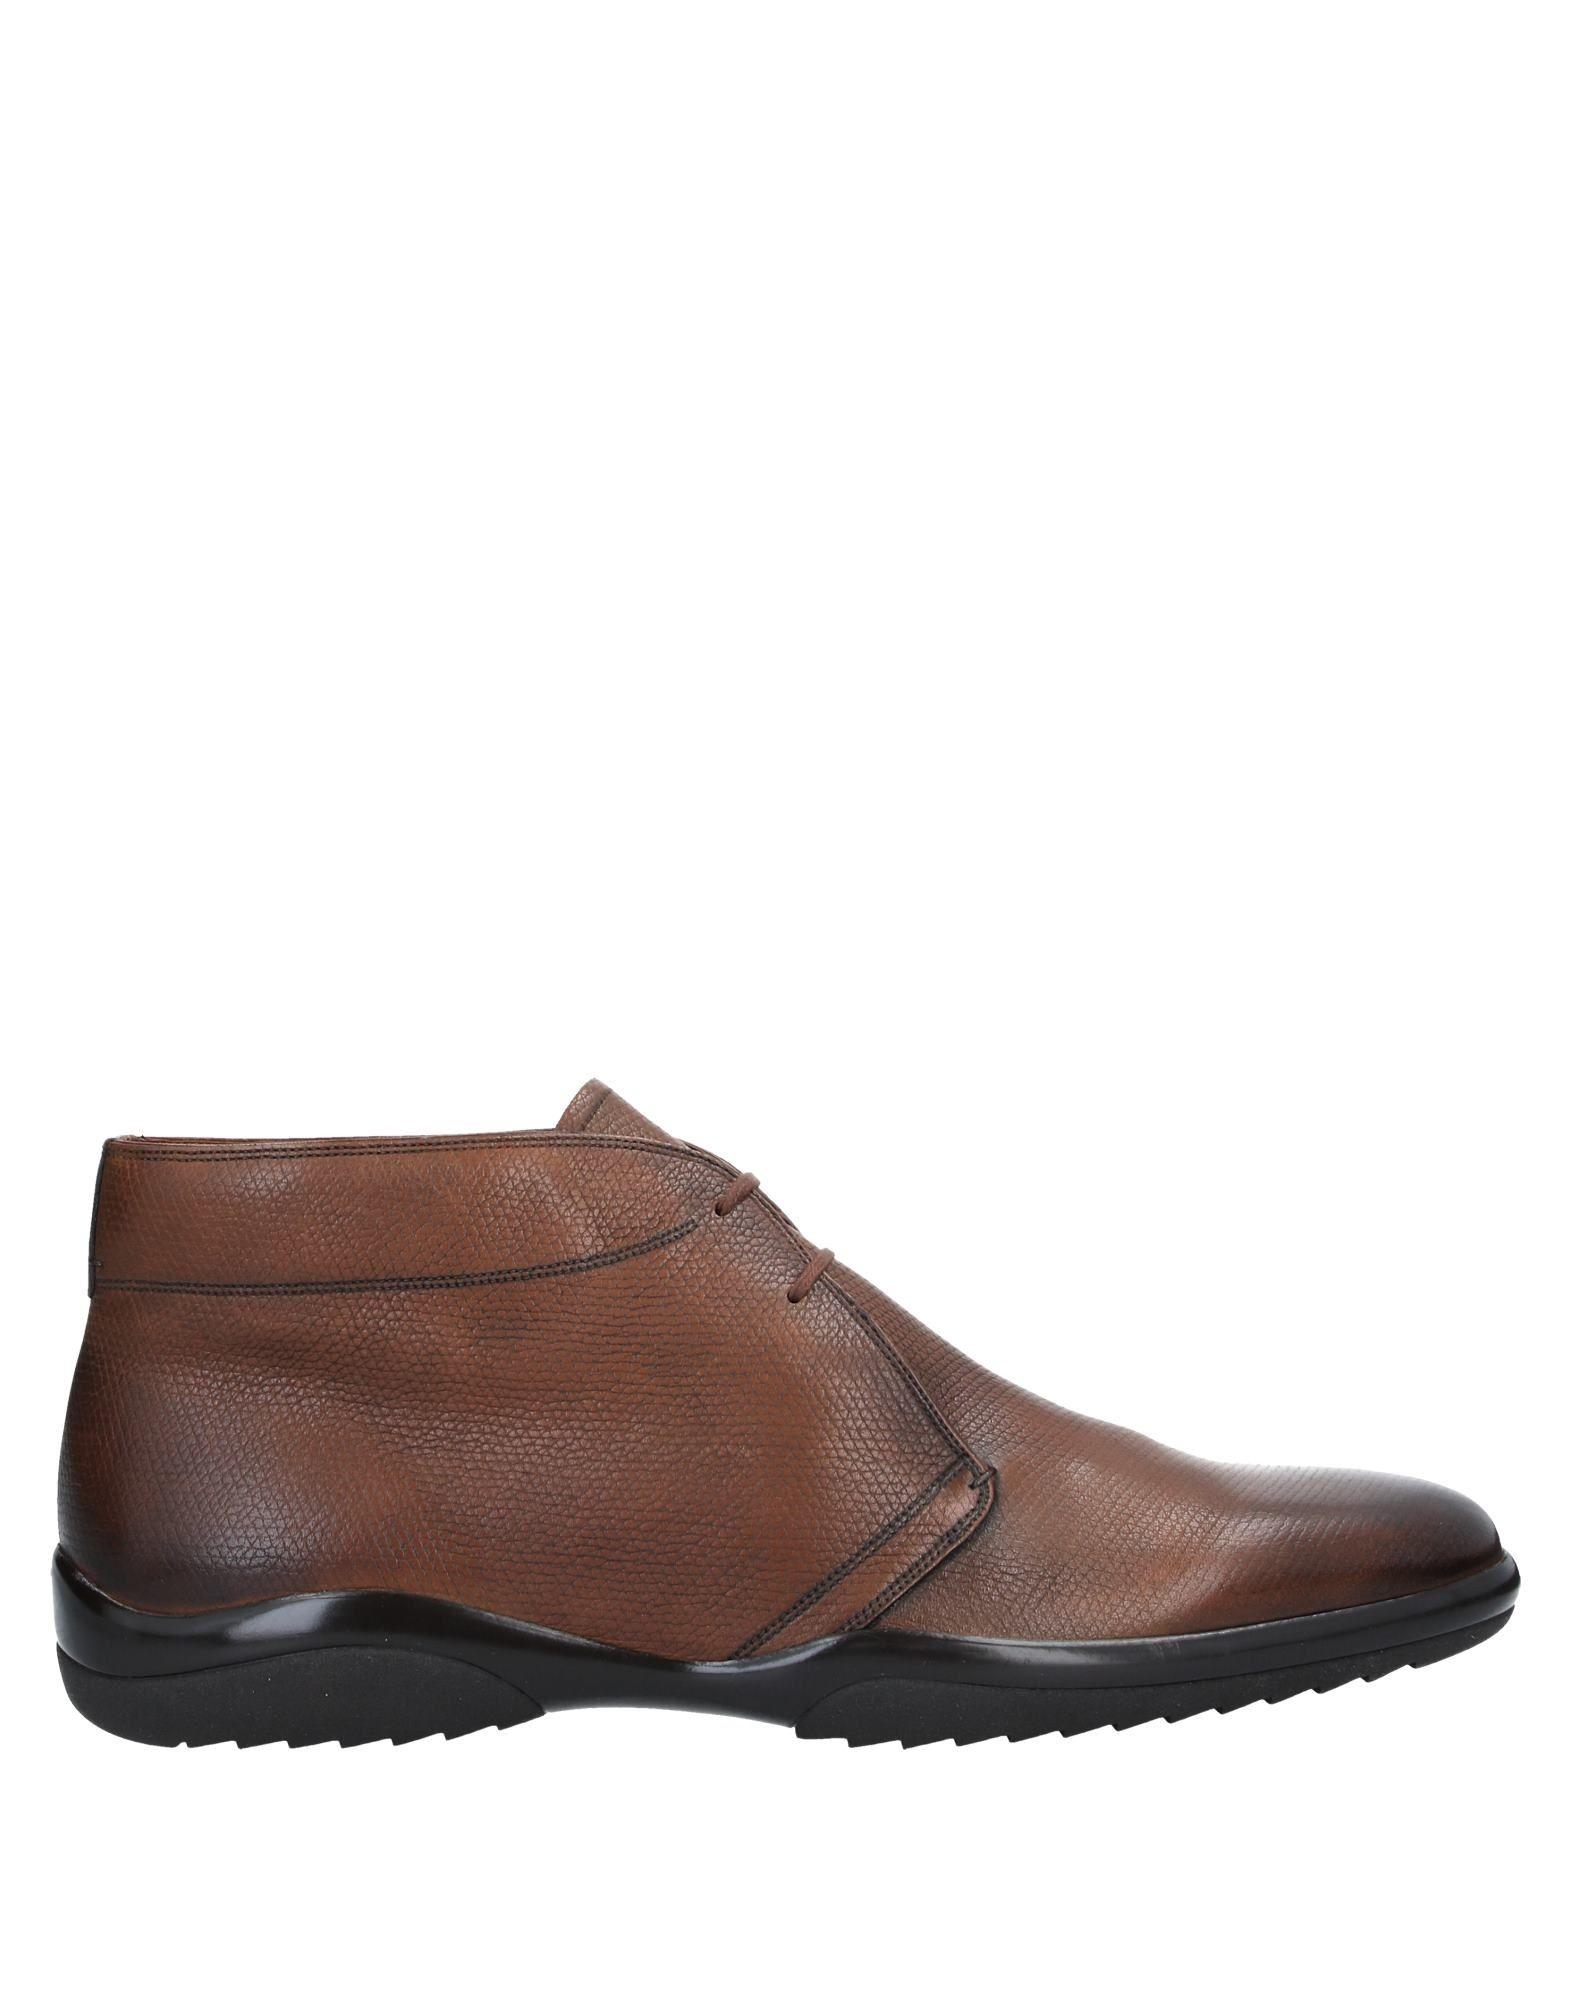 Bally Ankle Boots in Brown for Men - Lyst